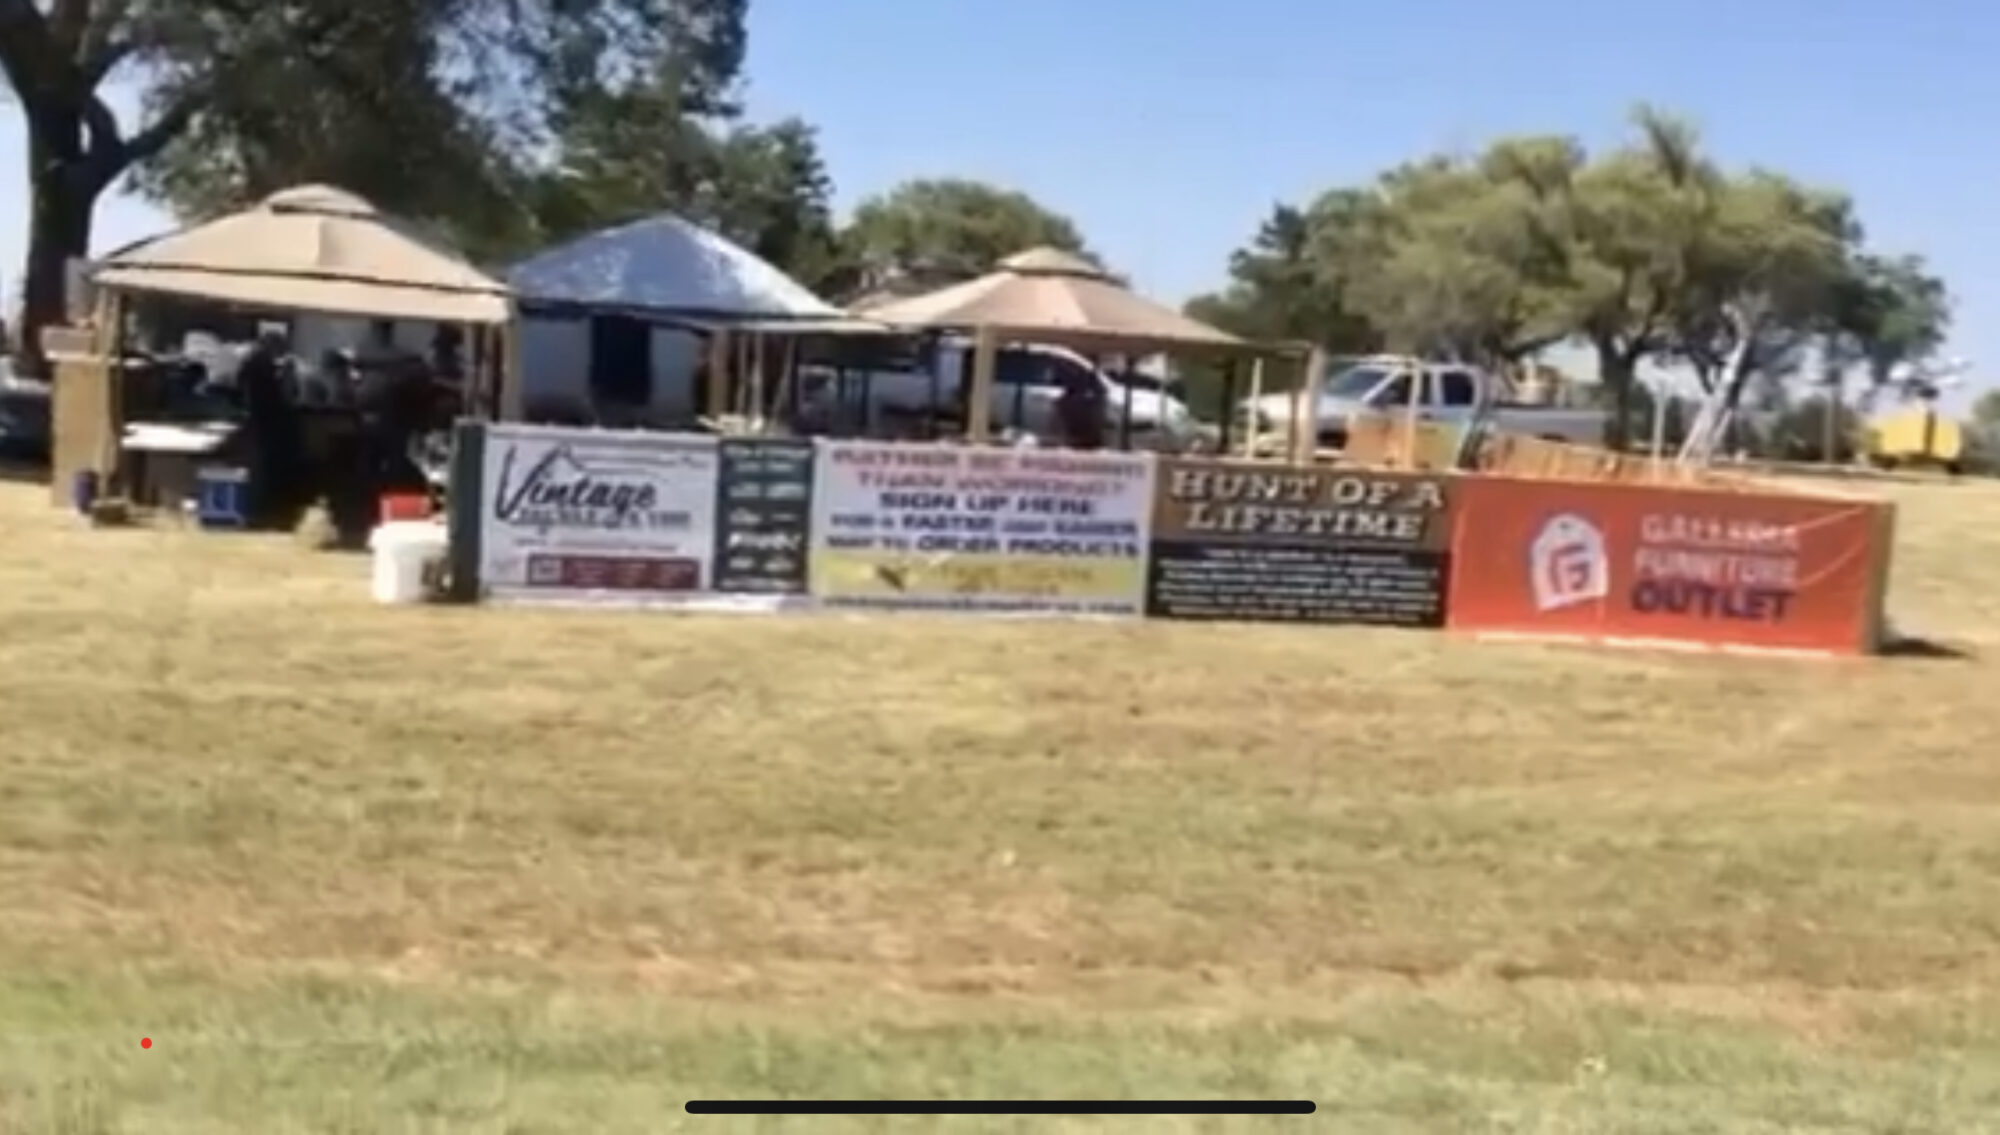 Sponsors banners at Foss Lake Christmas in July event